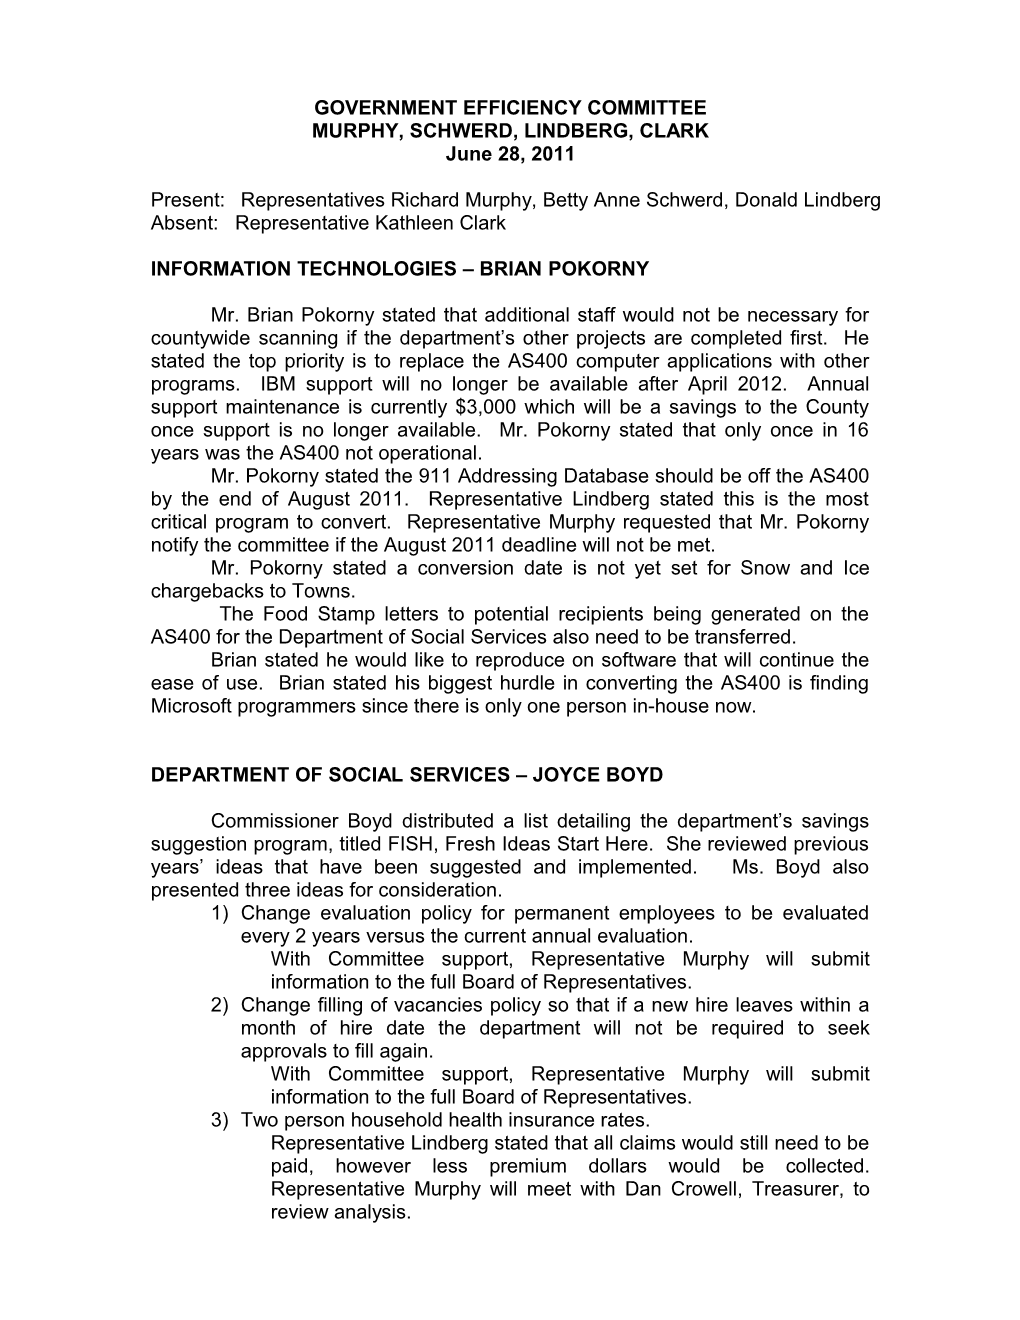 GOVERNMENT EFFICIENCY COMMITTEE Page 2